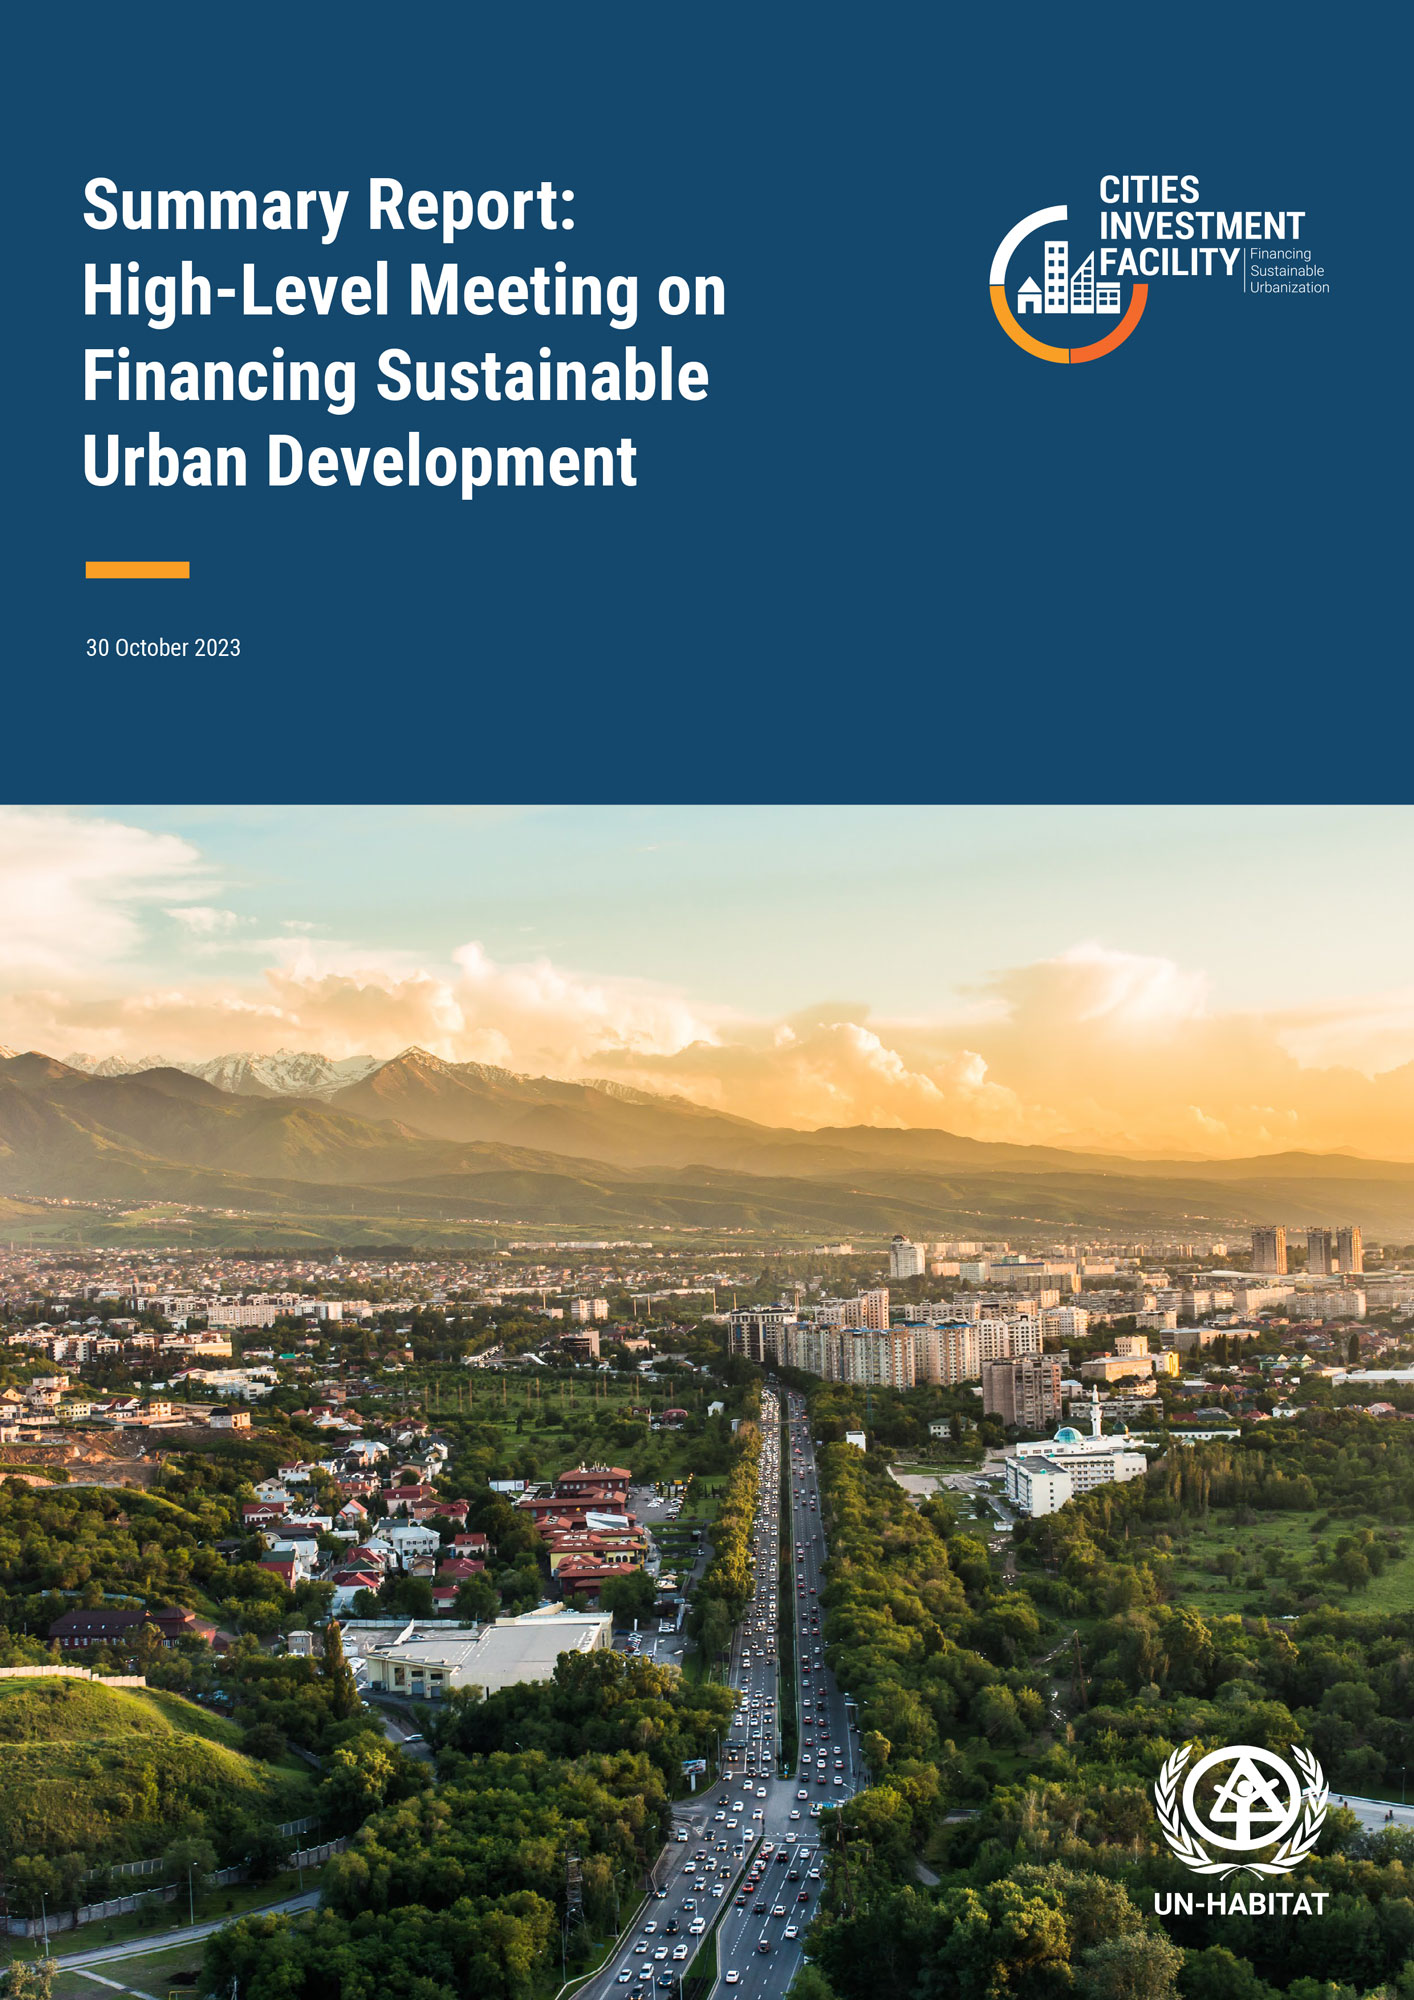 summary report high-level meeting on financing sustainable urban development